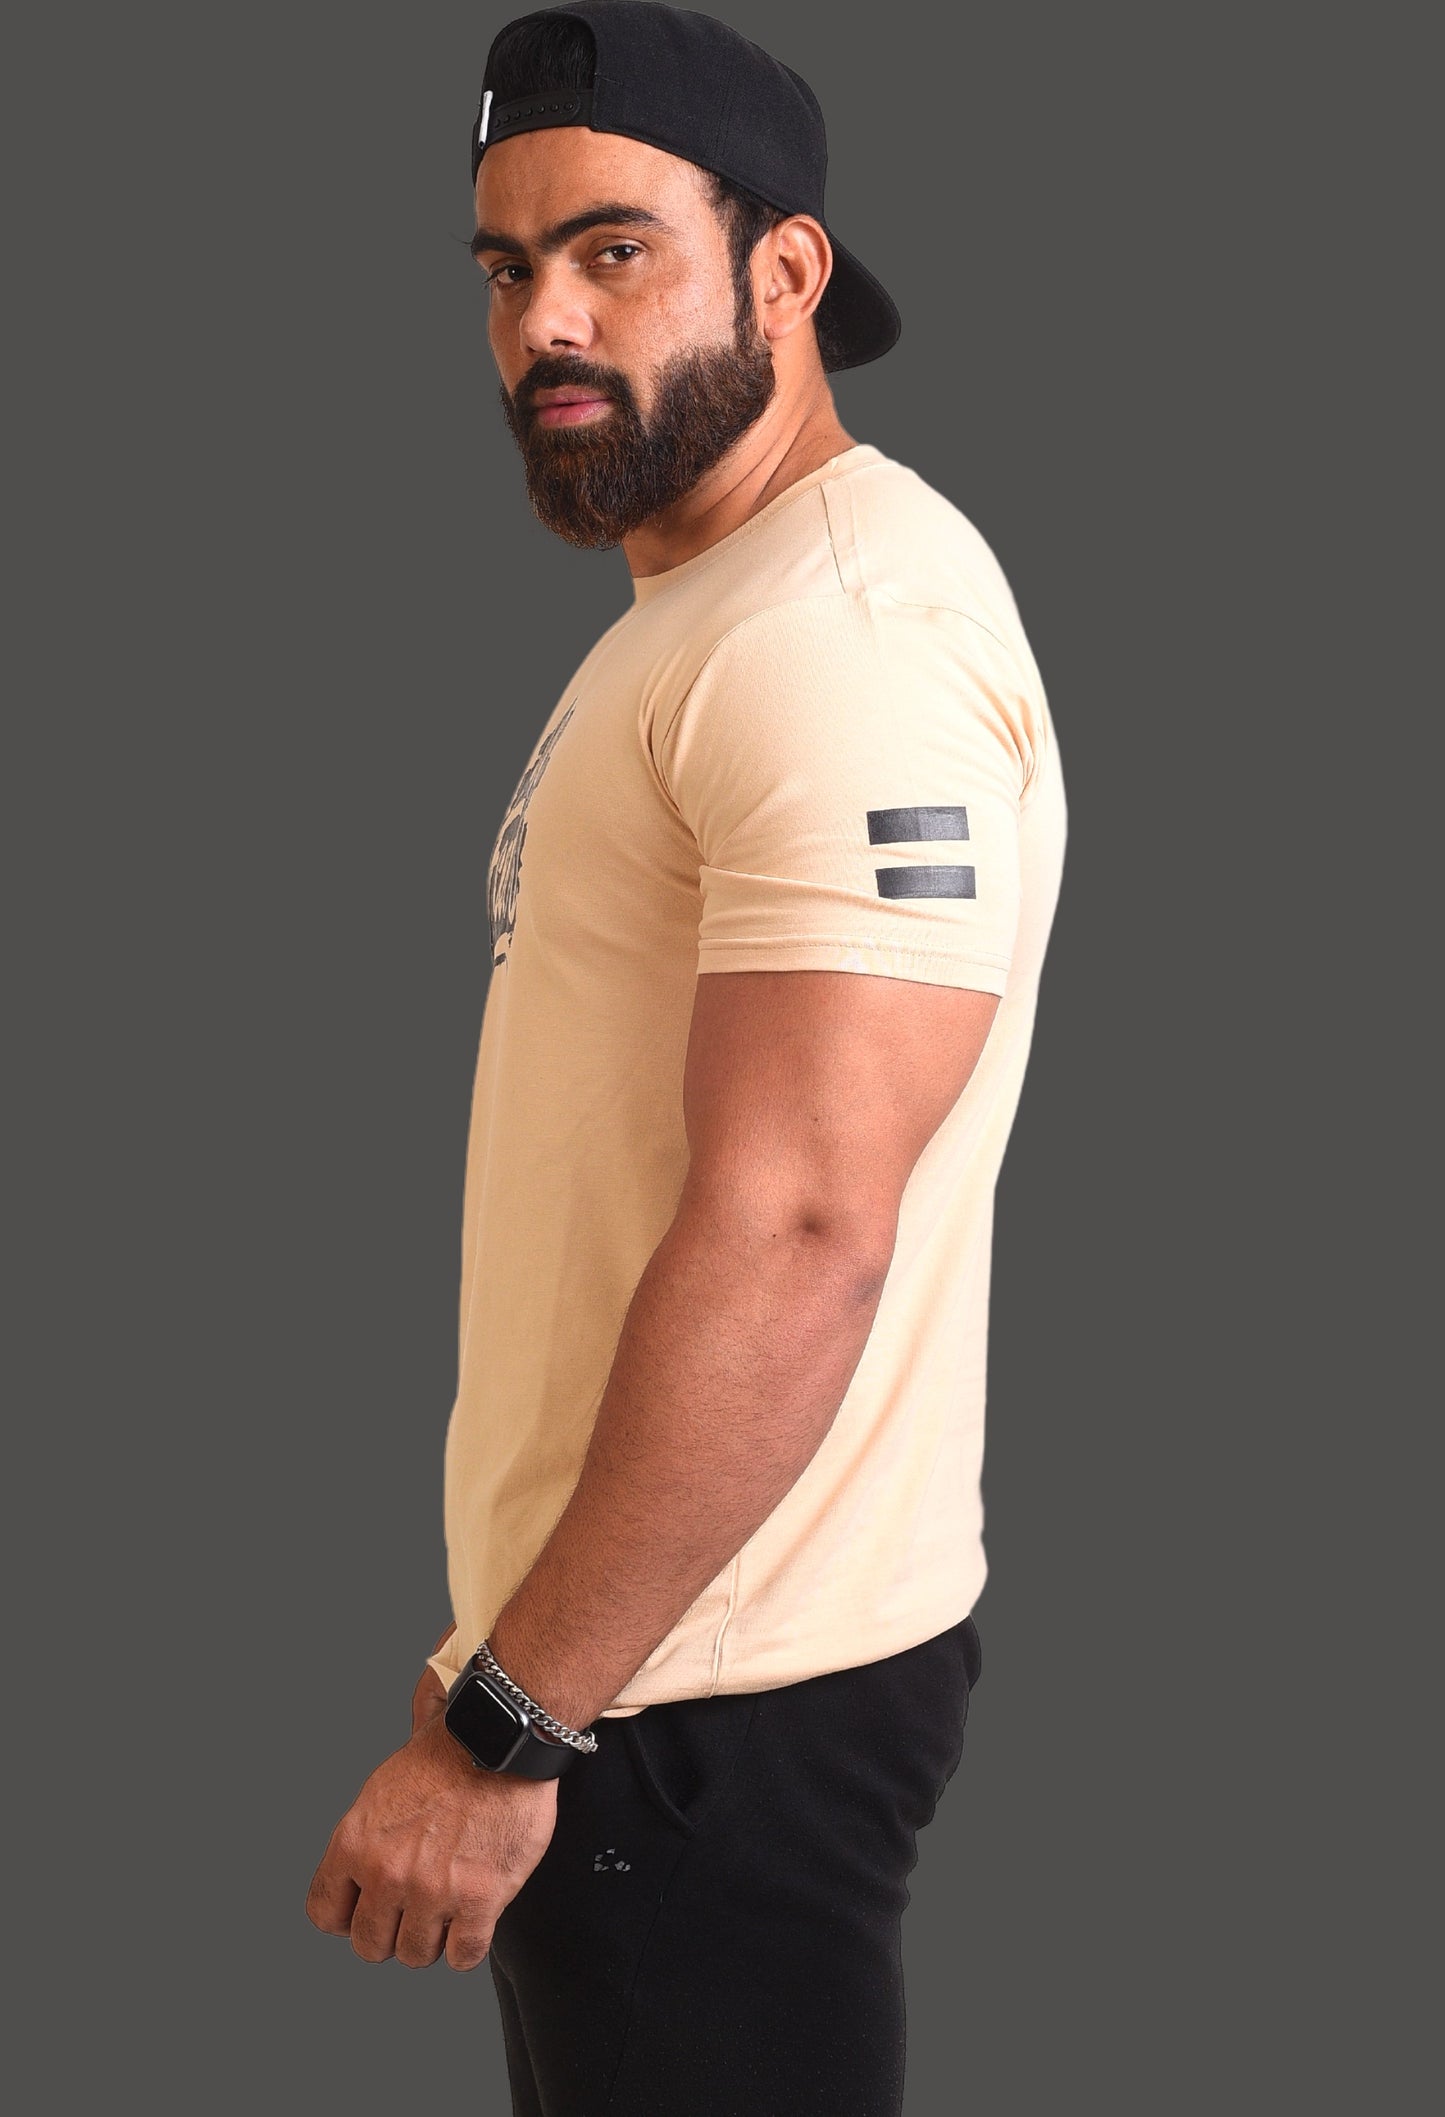 Gym T Shirt - No Fear with premium cotton Lycra. The Sports T Shirt by Strong Soul